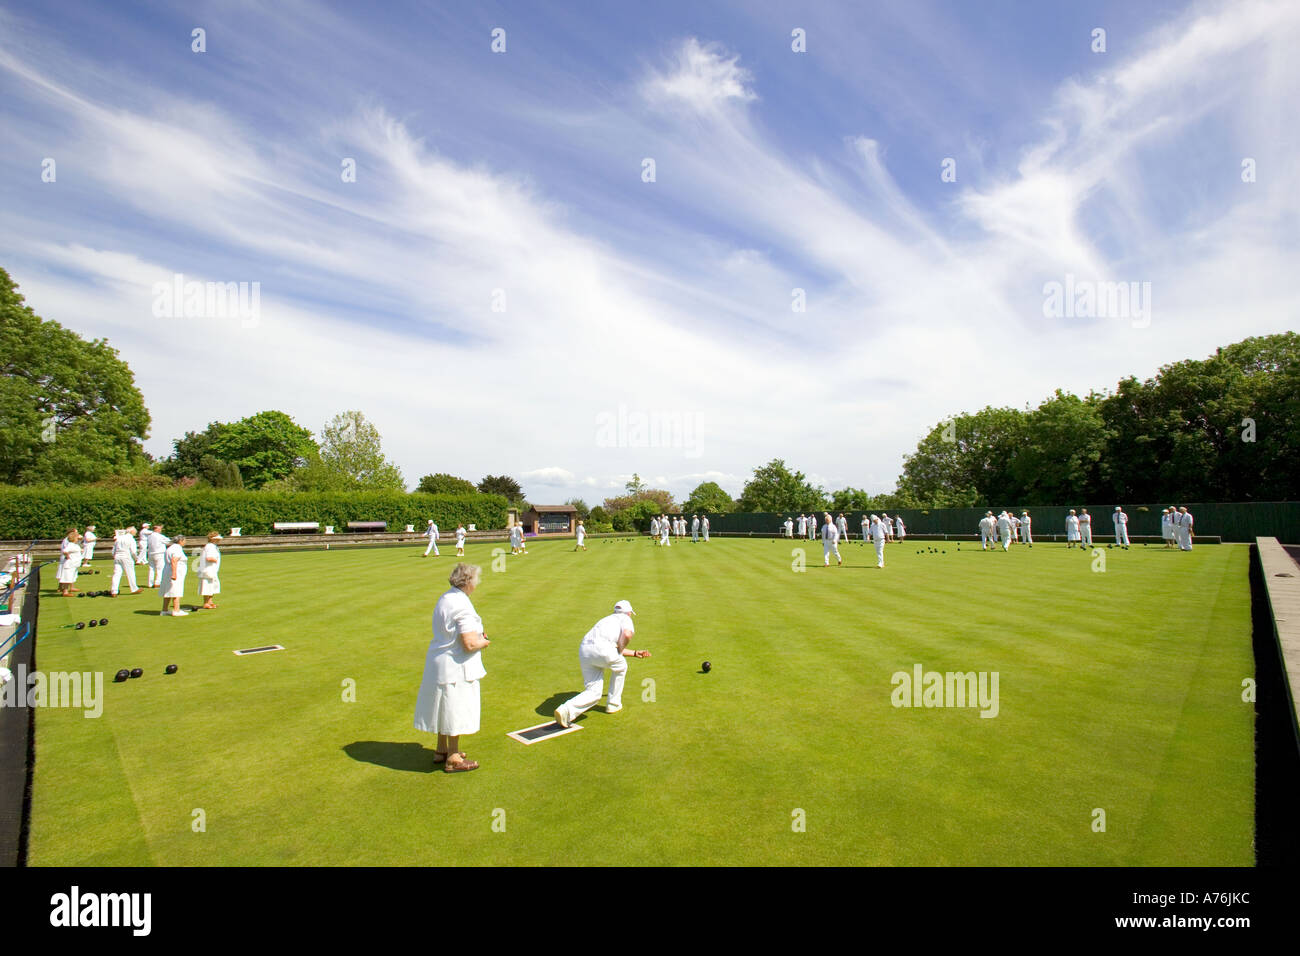 A wide angle view of the green with a male team member about to bowl. Stock Photo